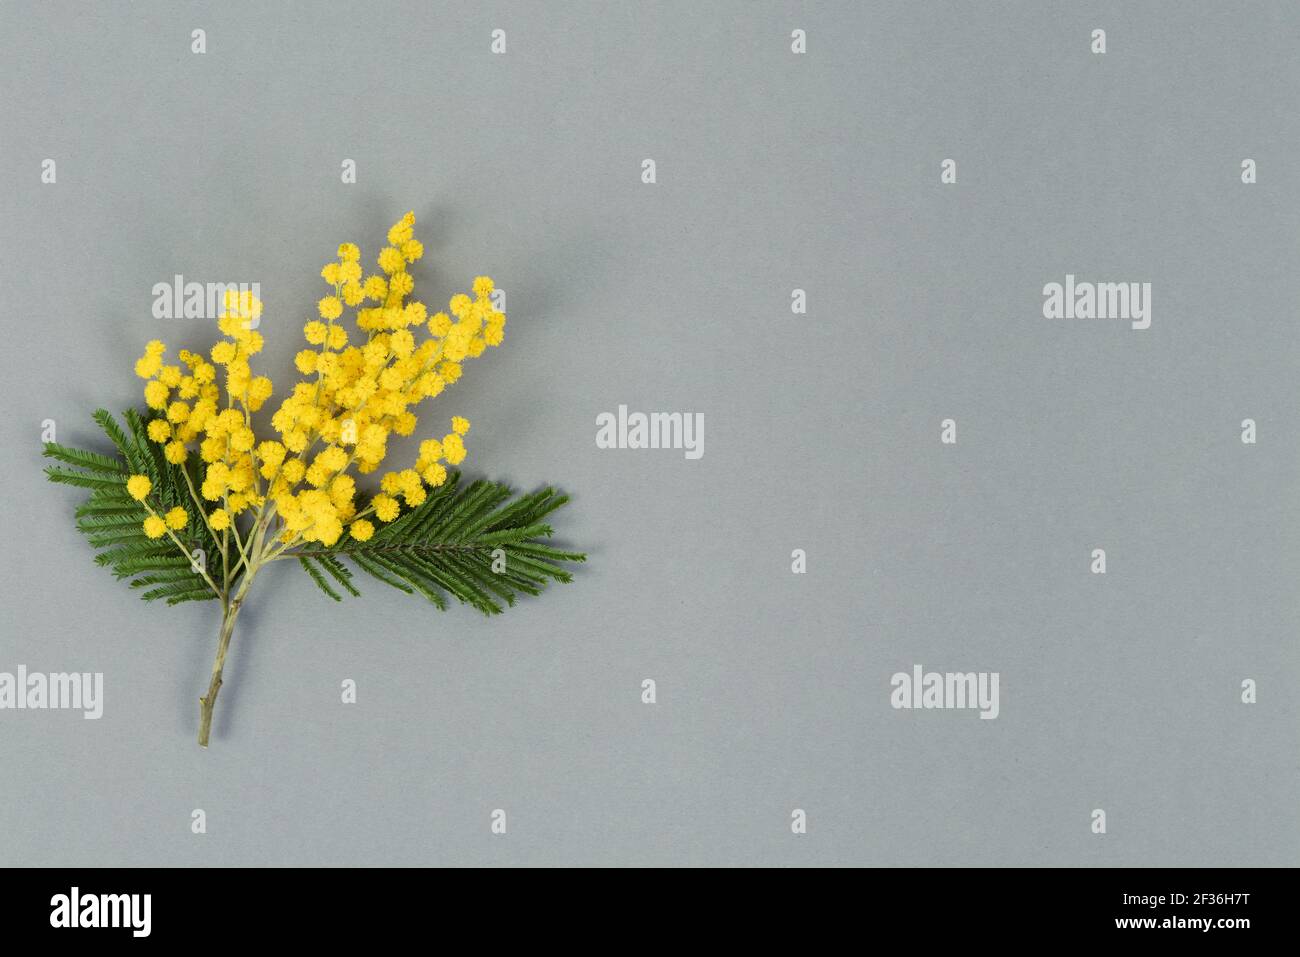 Mimosa flowers on gray background. Top view. Copy space. Stock Photo